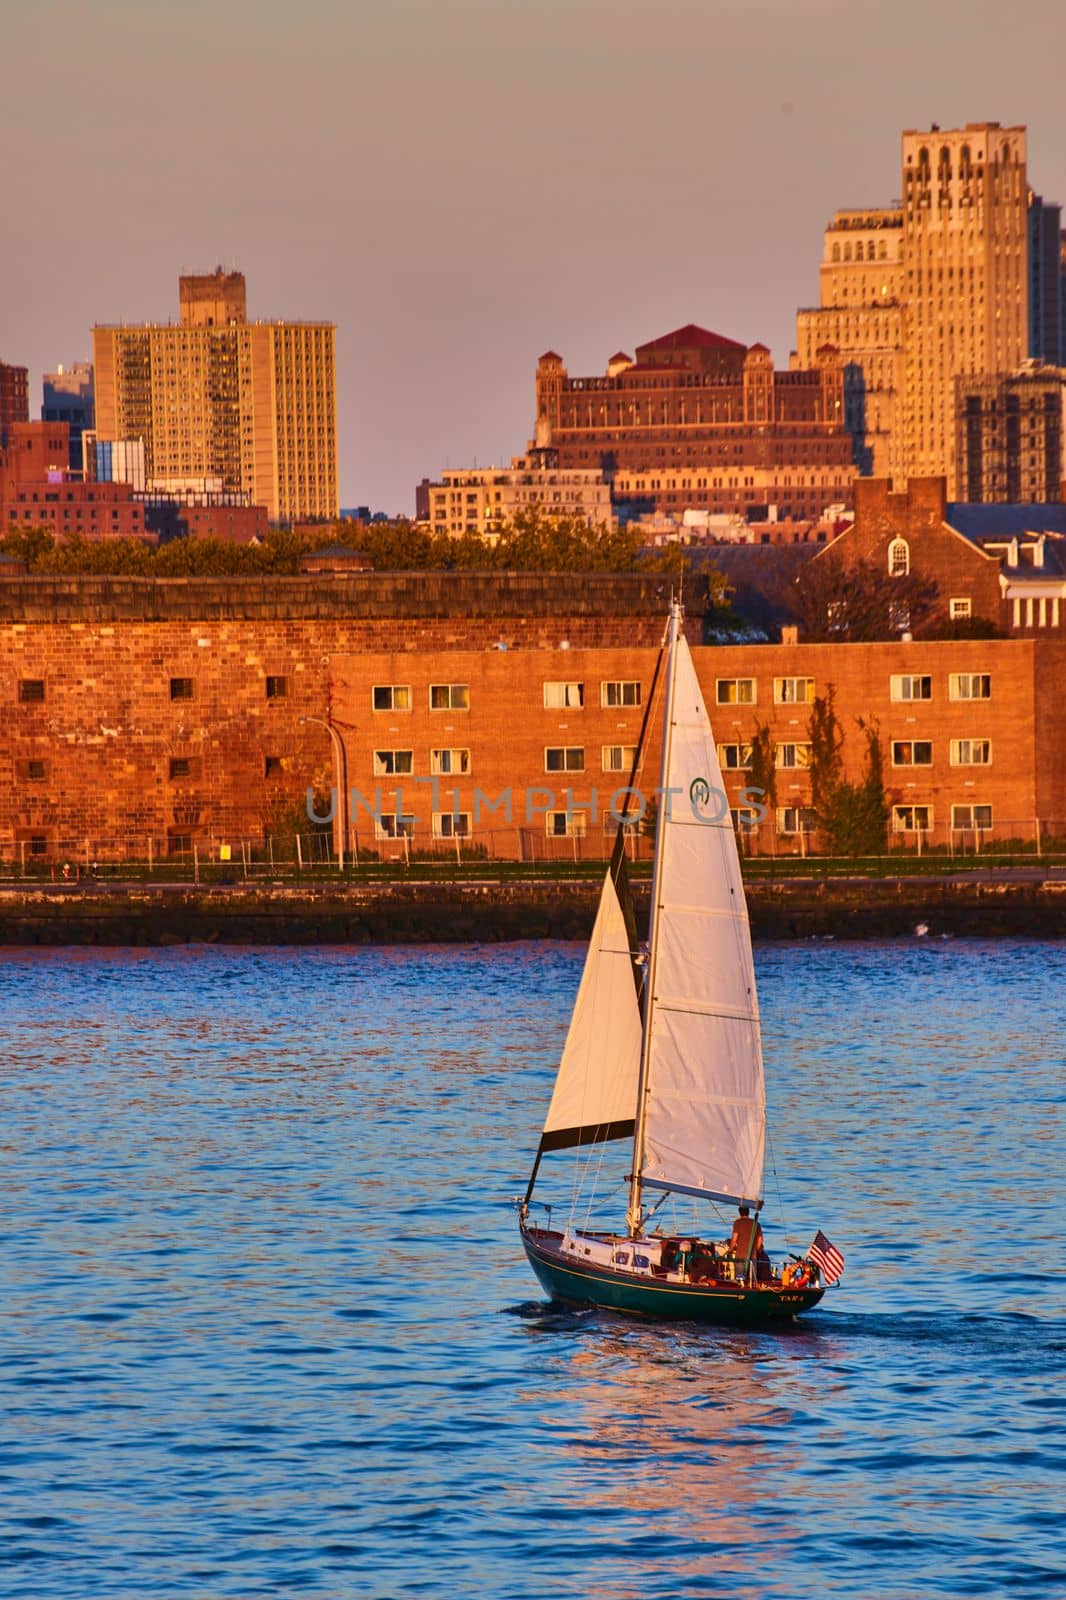 Dusk golden hour focus on sailboat in waters by Governors Island in New York City by njproductions